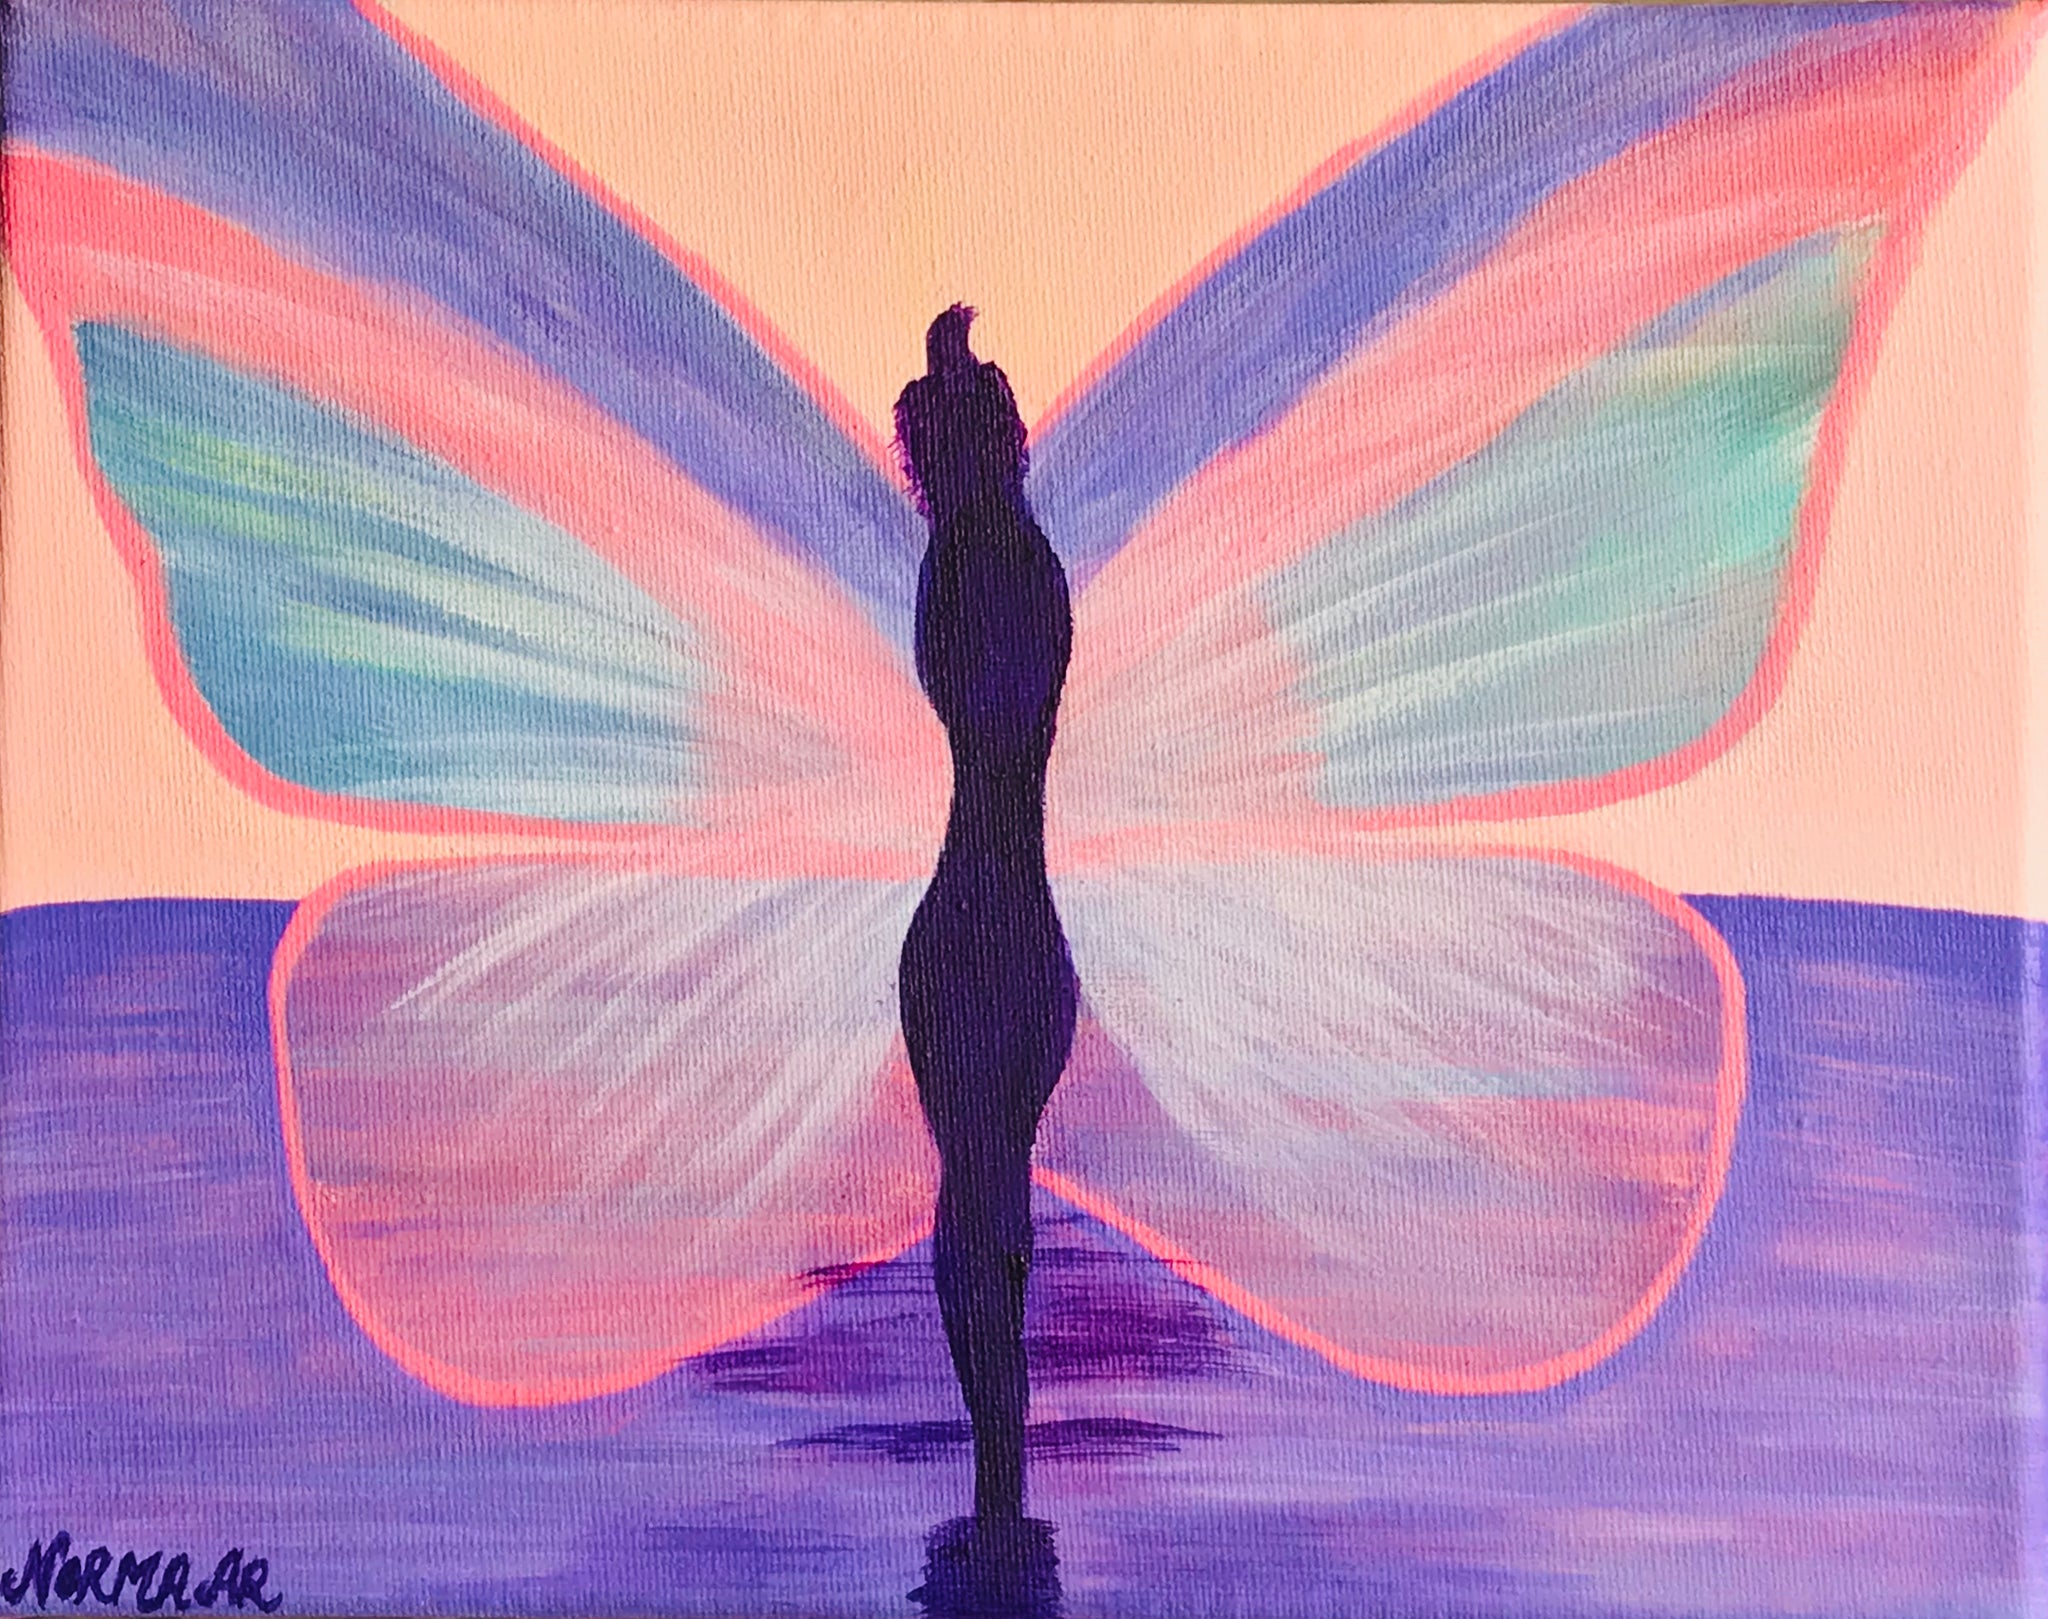 The Butterfly | Original Art Acrylic Painting, 8x10 inch canvas by Norma Abou-Rizk